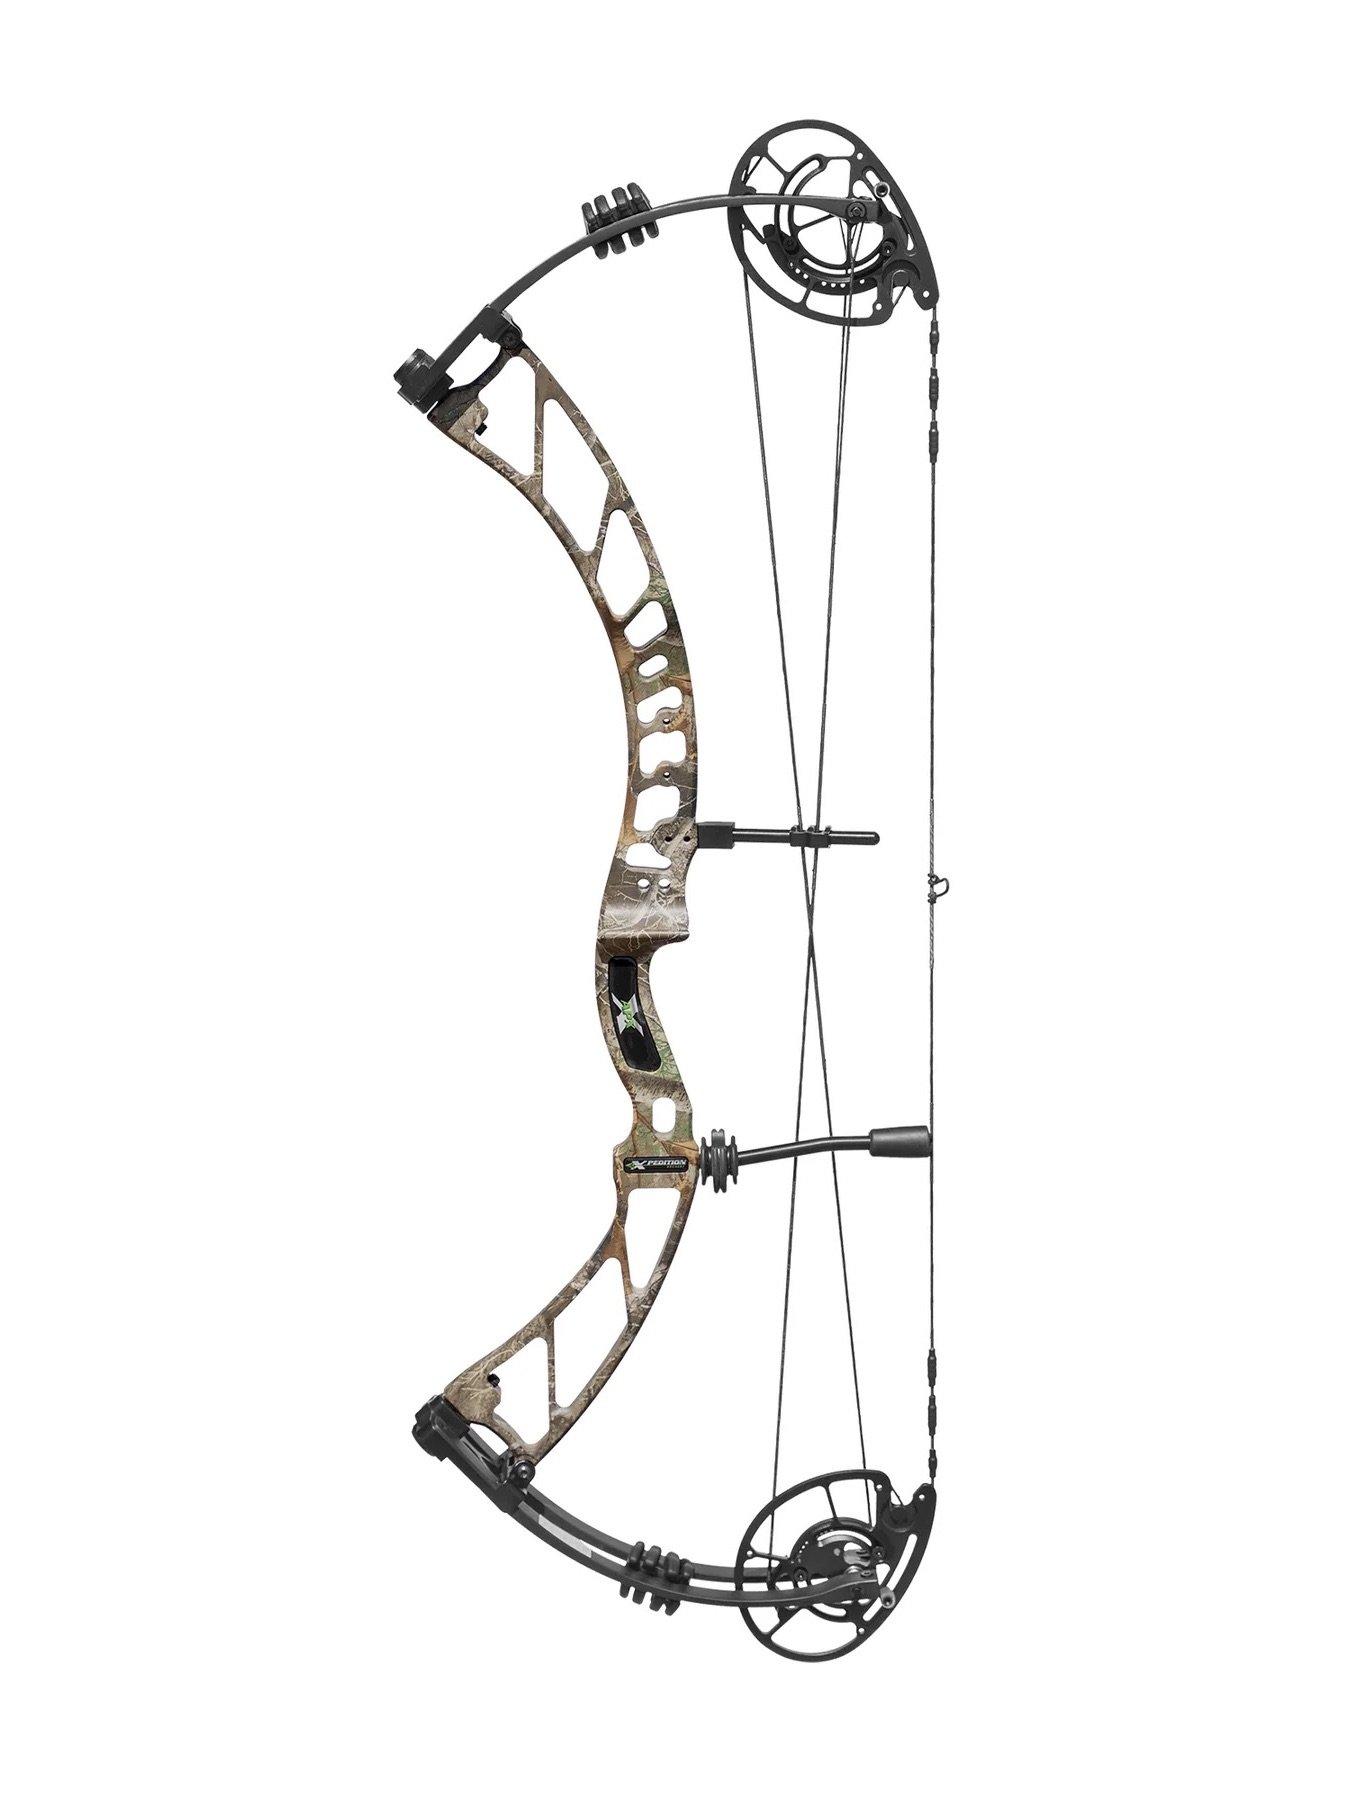 Image: Xpedition_Archery_APX